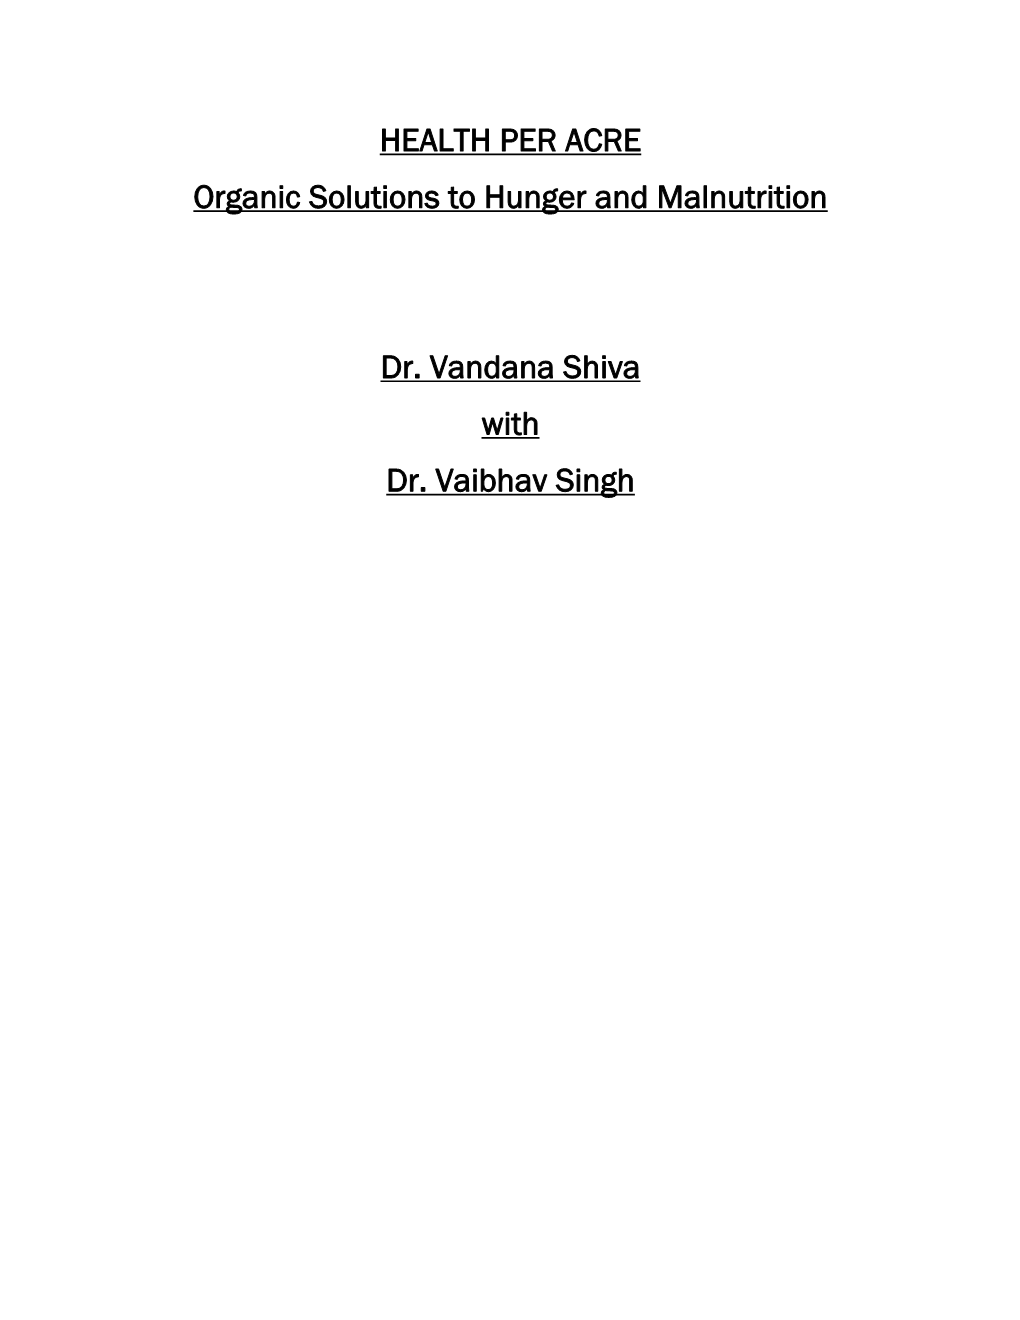 HEALTH PER ACRE Organic Solutions to Hunger and Malnutrition